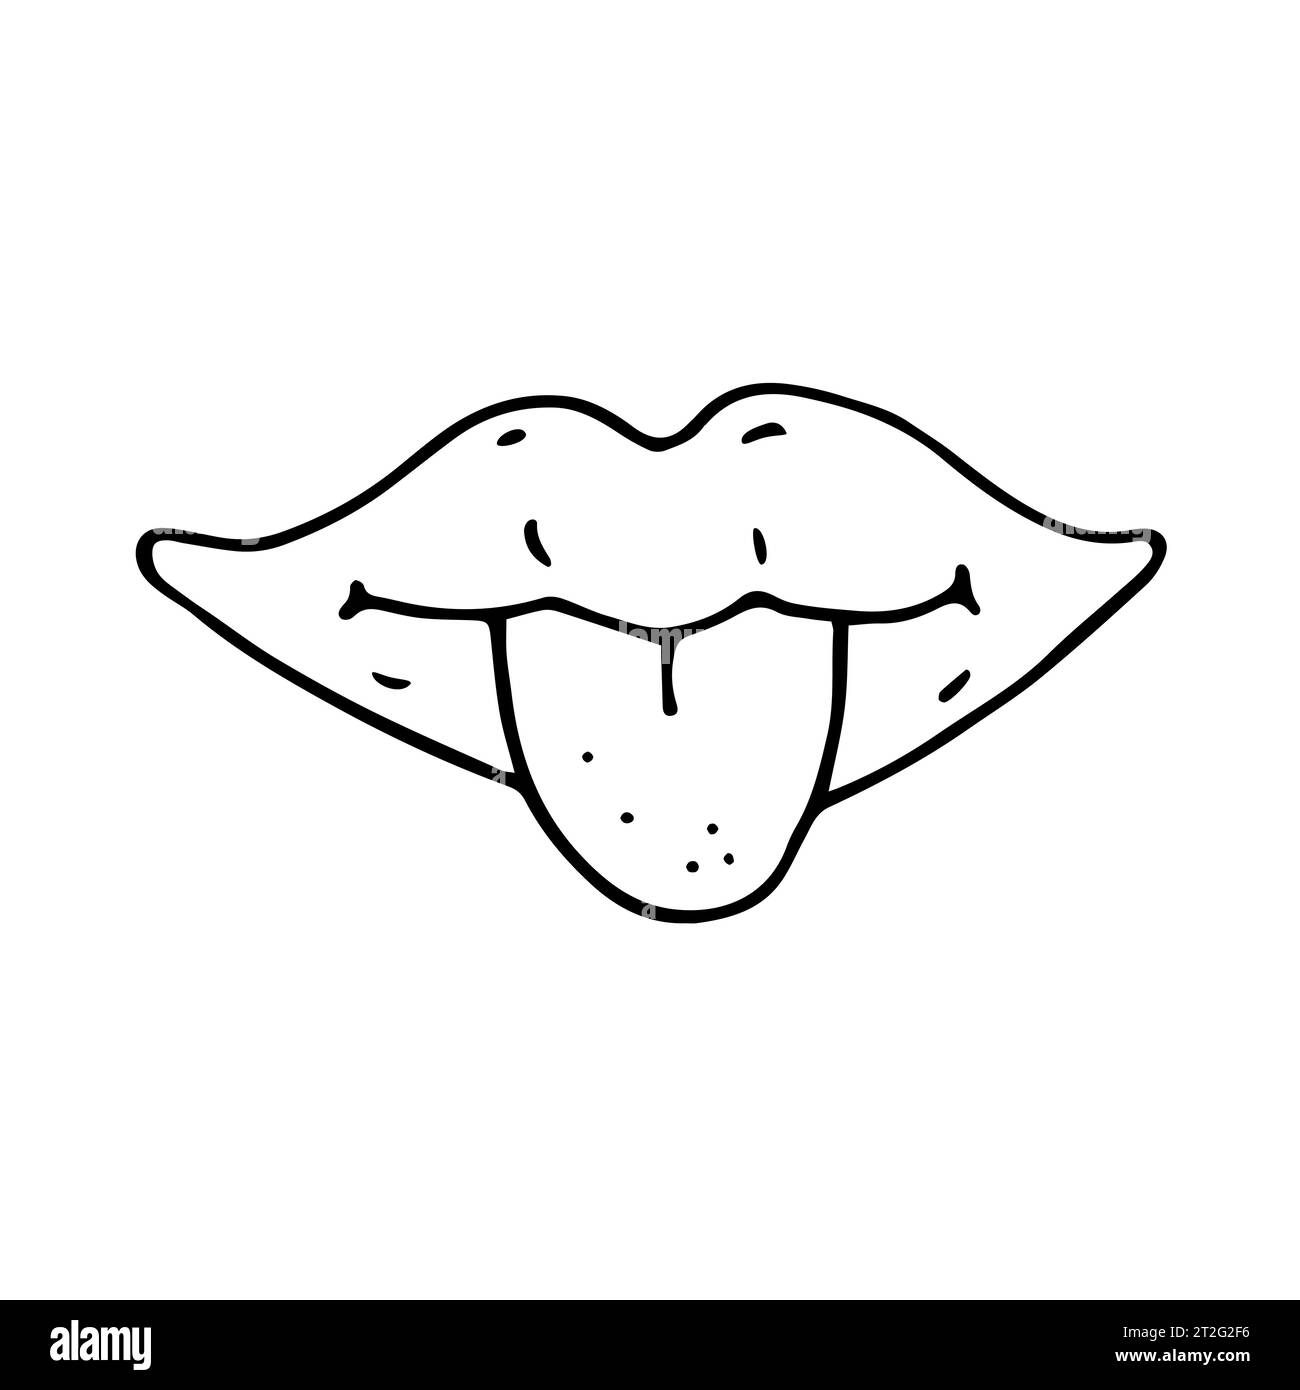 Lips with sticking tongue in doodle style. Vector illustration isolated on white background Stock Vector